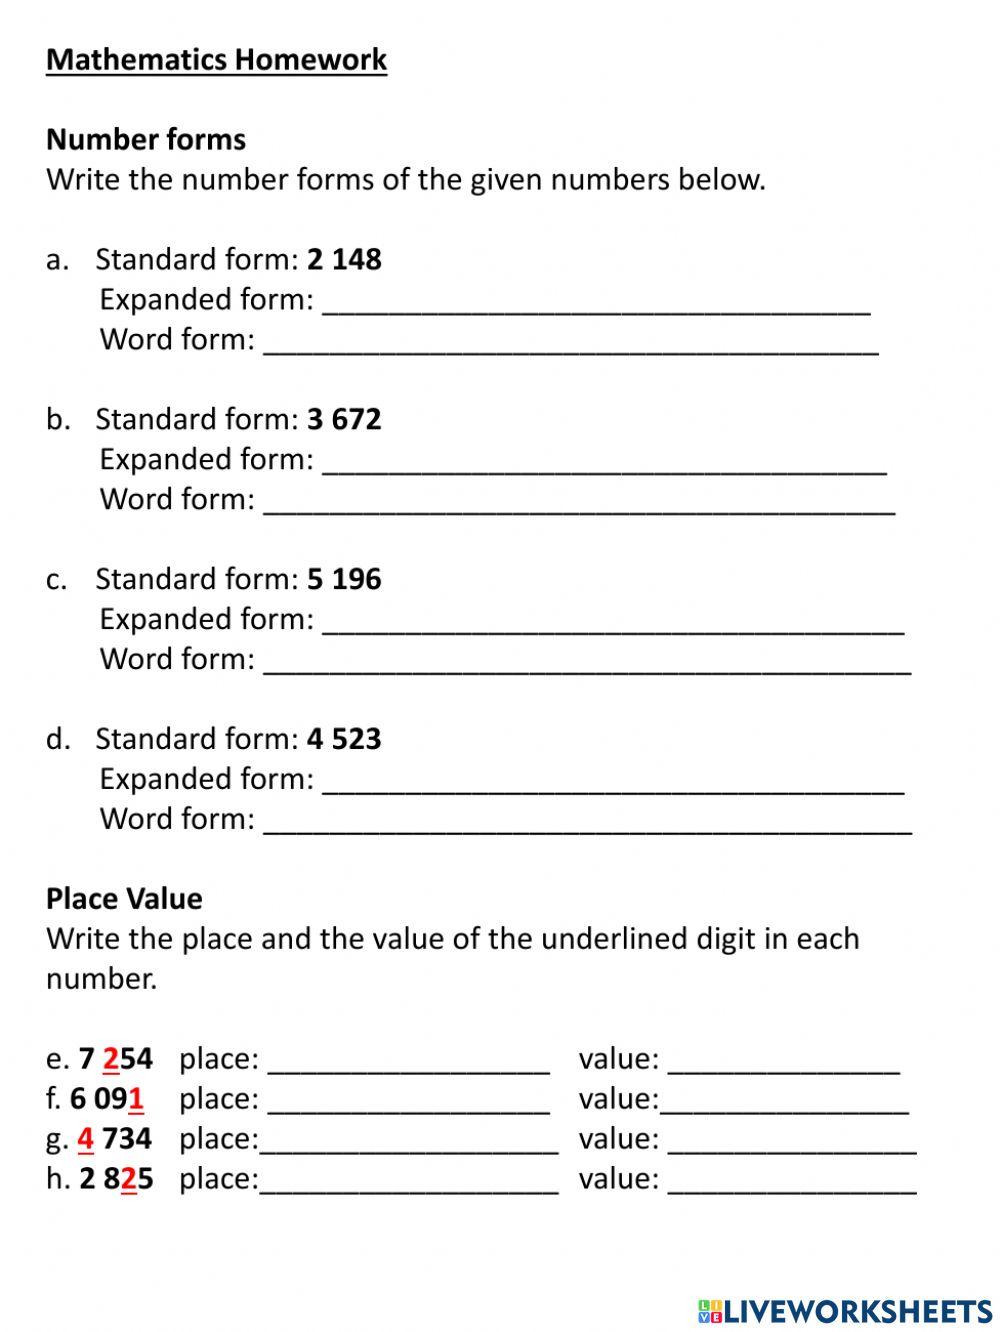 Number forms